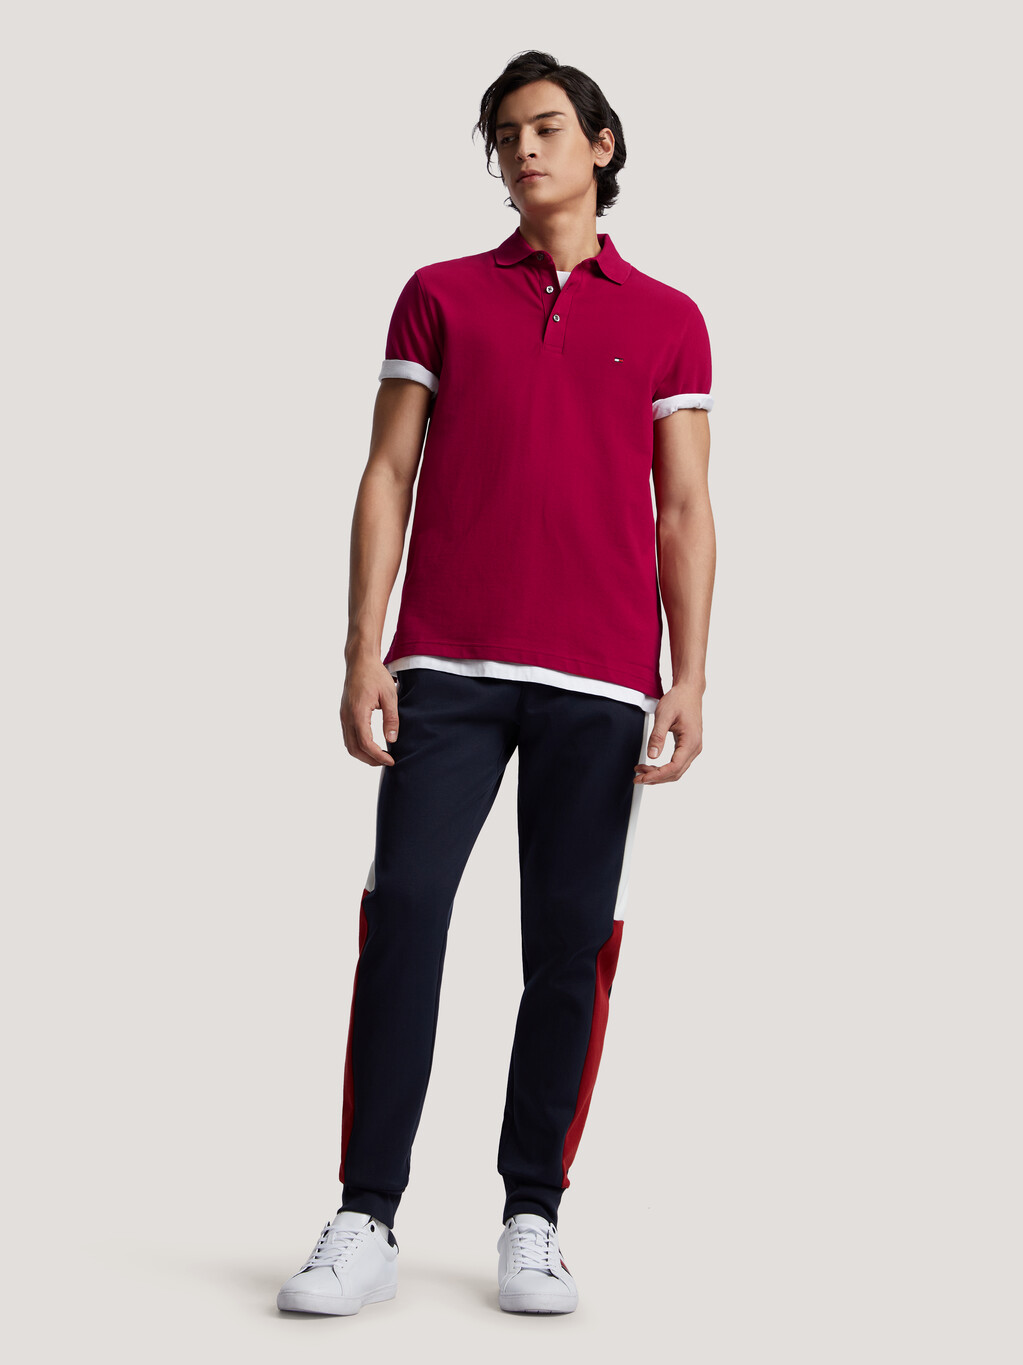 1985 Collection Slim Fit Polo, Royal Berry, hi-res